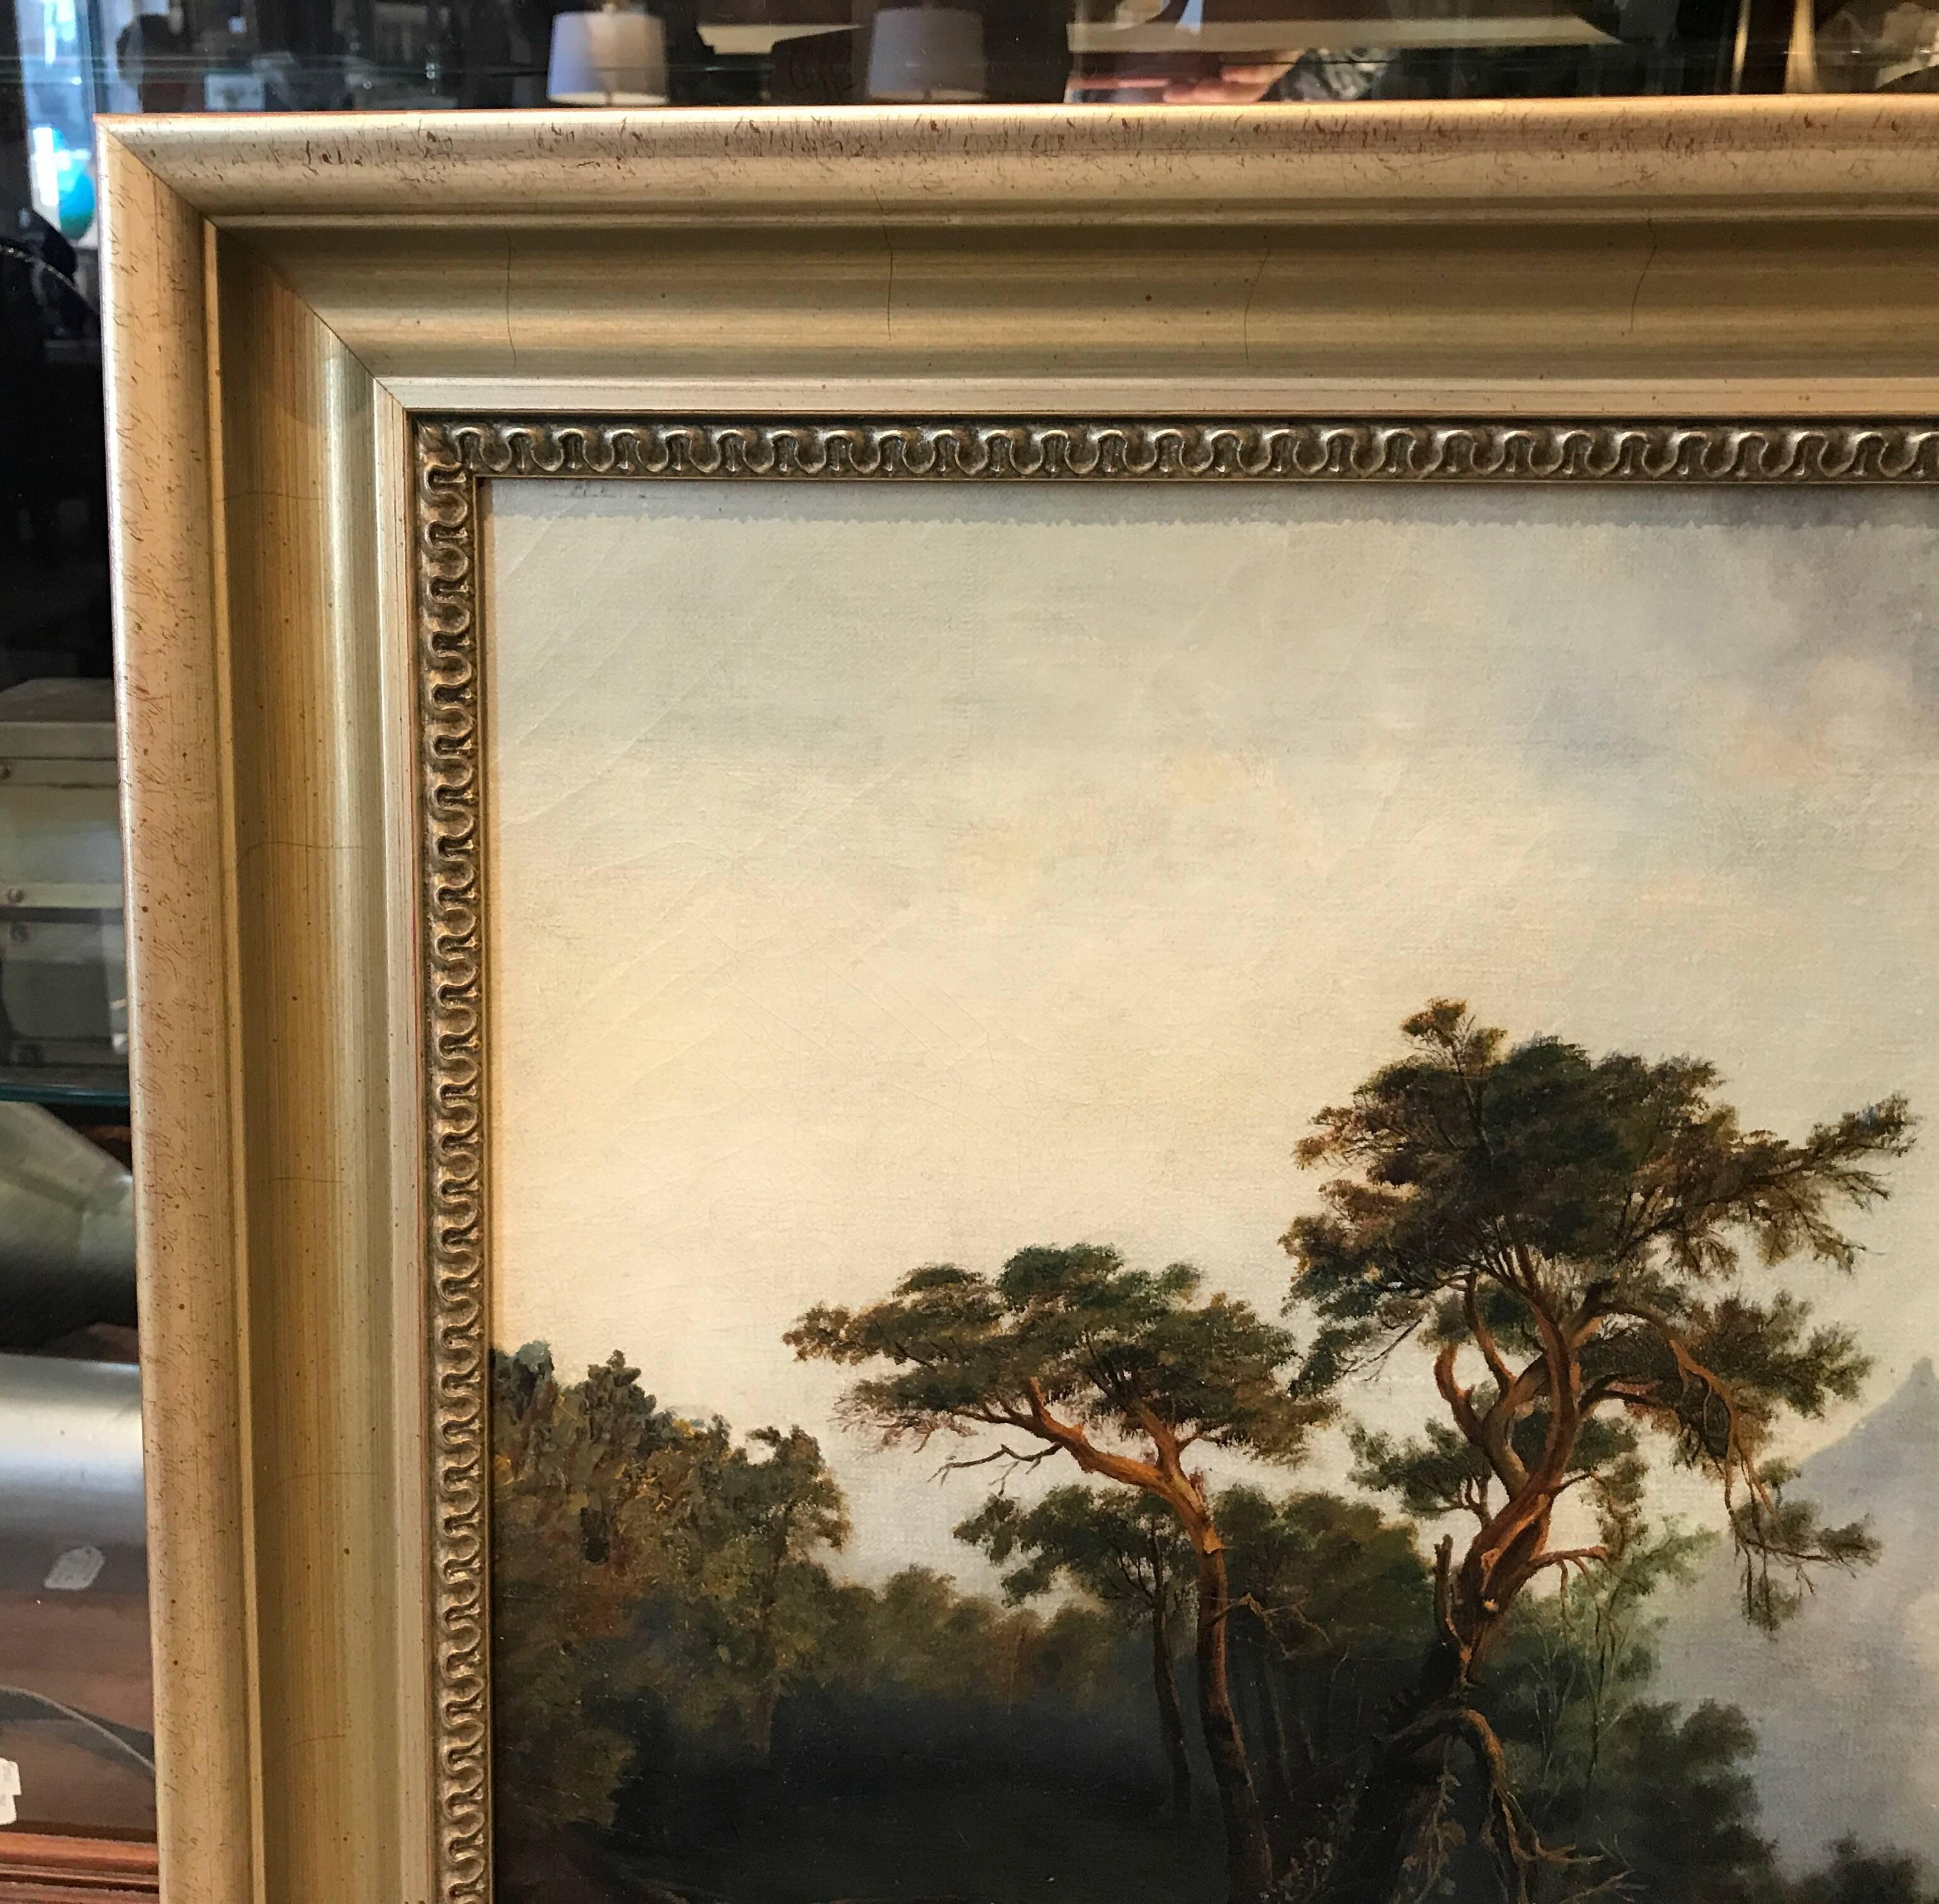 Giltwood Antique 19th Century European Oil Painting on Canvas Signed M. L. Tunner, 1872 For Sale